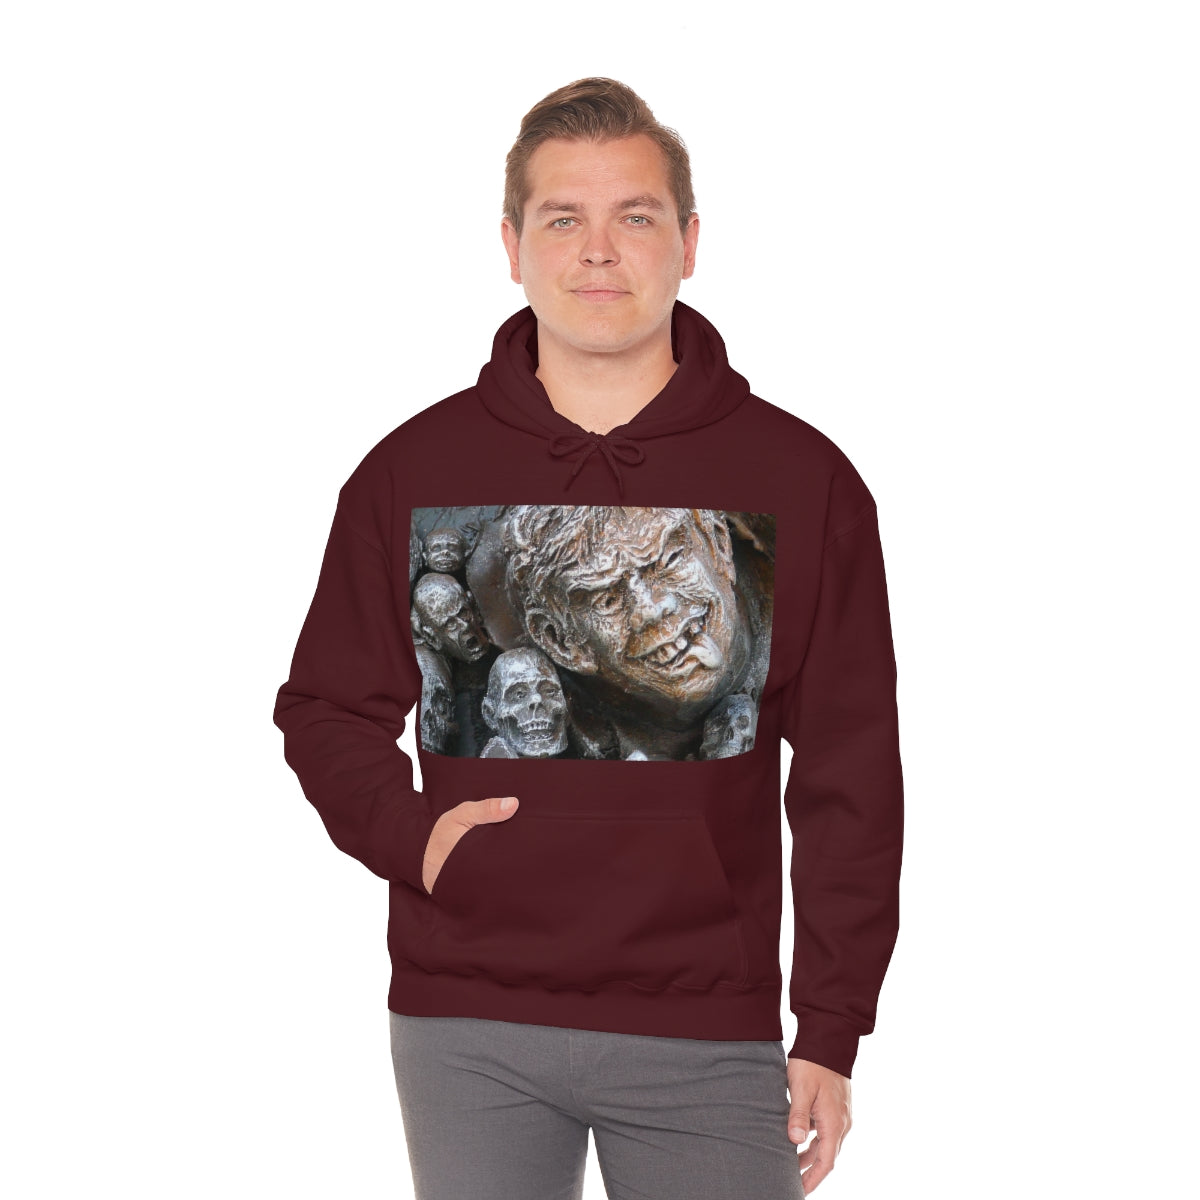 Waiting for the King - Unisex Heavy Blend Hooded Sweatshirt - Fry1Productions